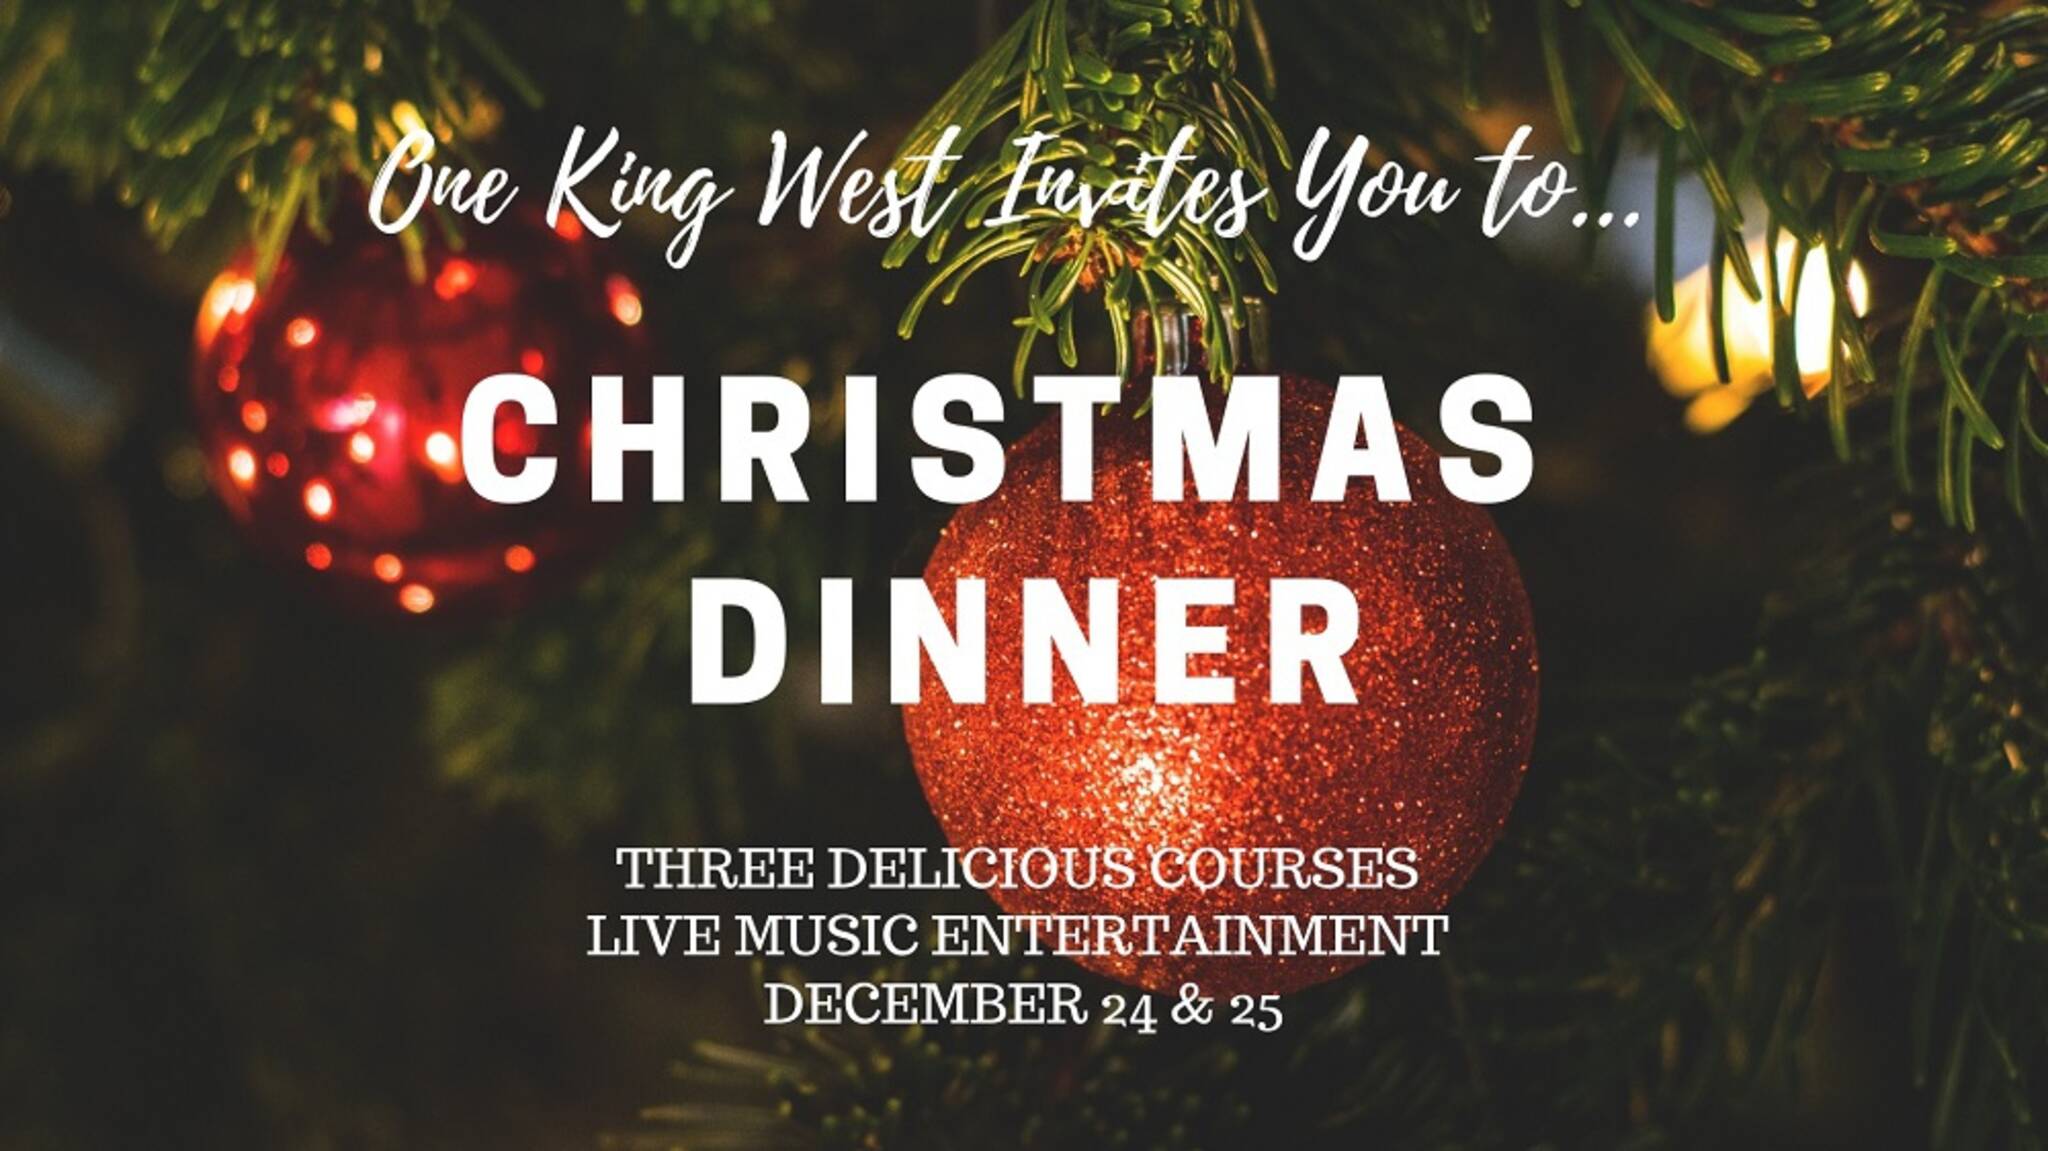 Christmas Dinner at One King West